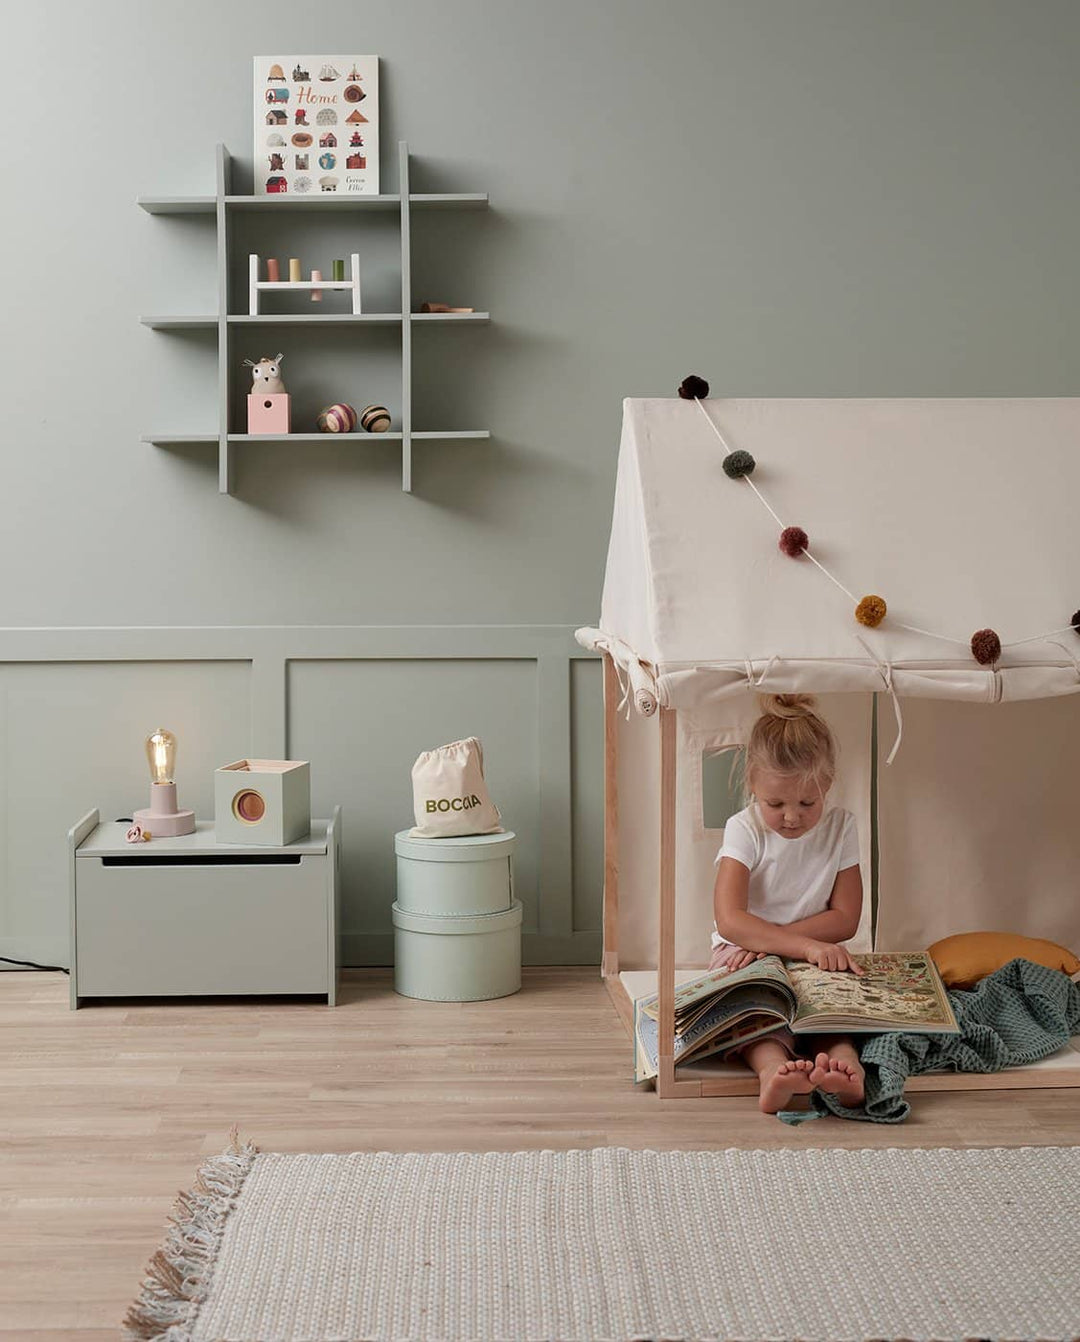 Kid's Concept - Play House Tent Off White - All Mamas Children